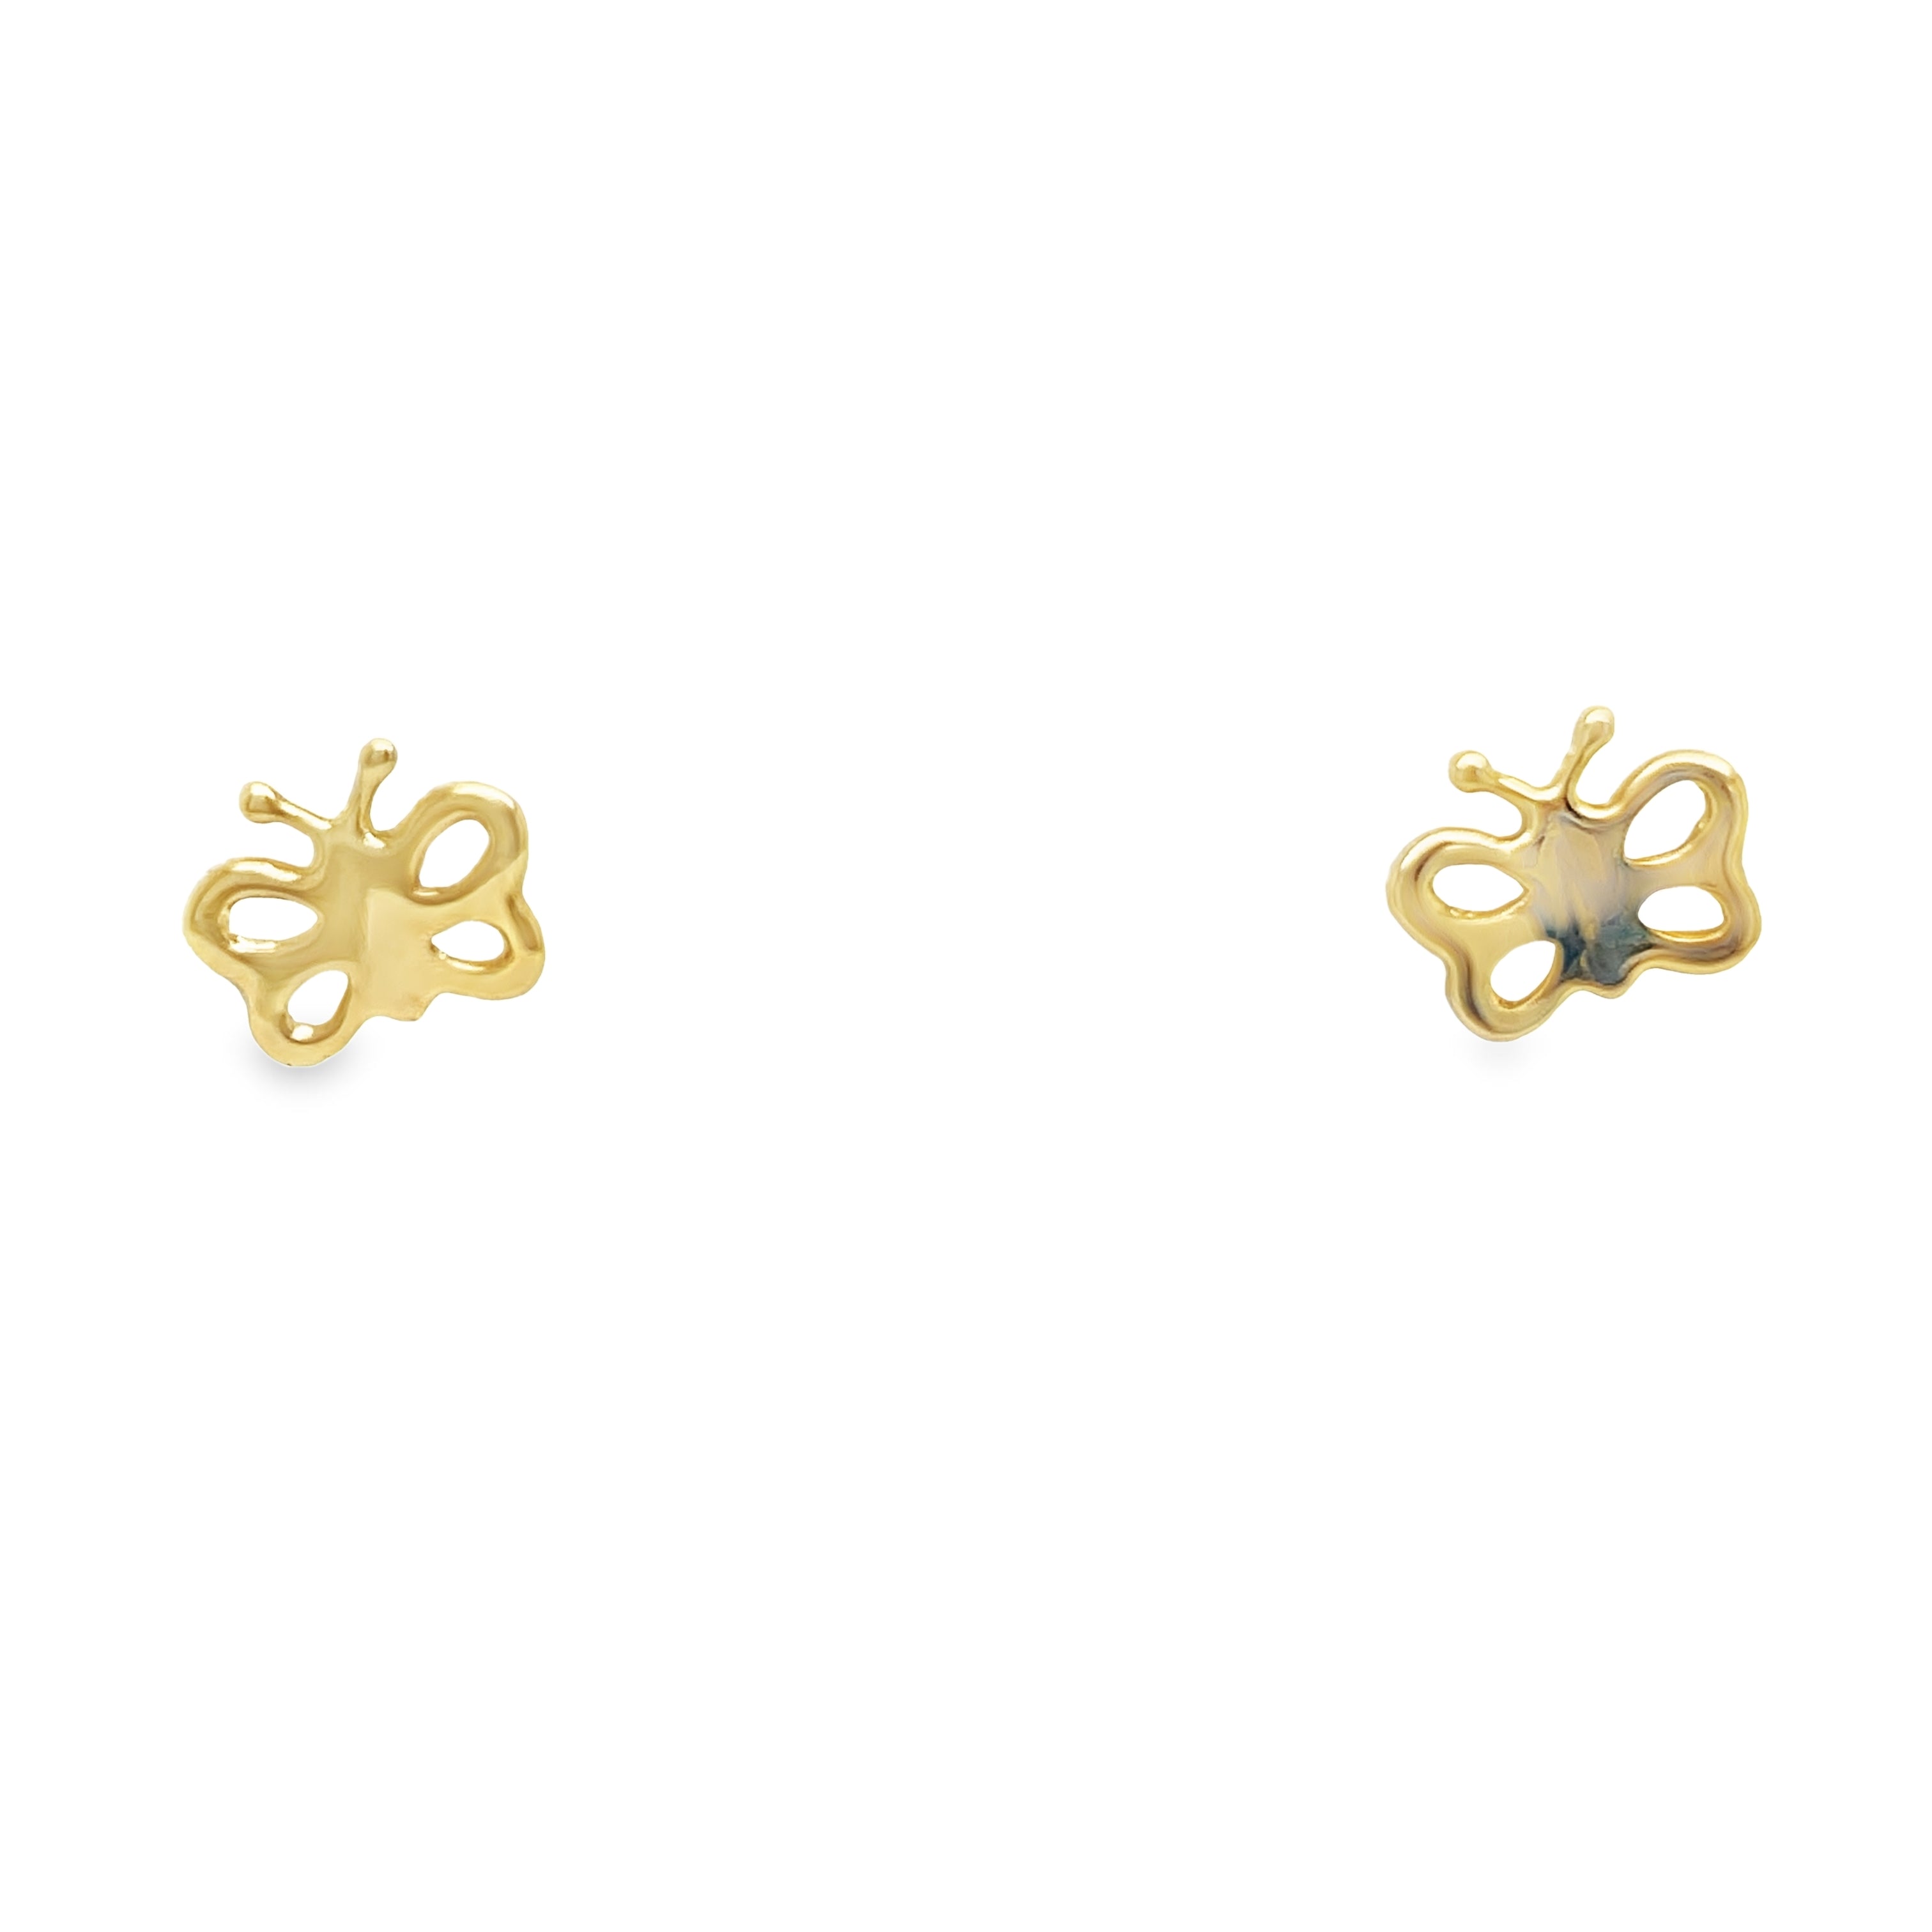 <p><span style="font-size: 0.875rem;">These exquisite flower earrings for babies feature 14k yellow gold construction with butterfly shape securely affixed using baby screw backs.</span></p> <p>&nbsp;</p>